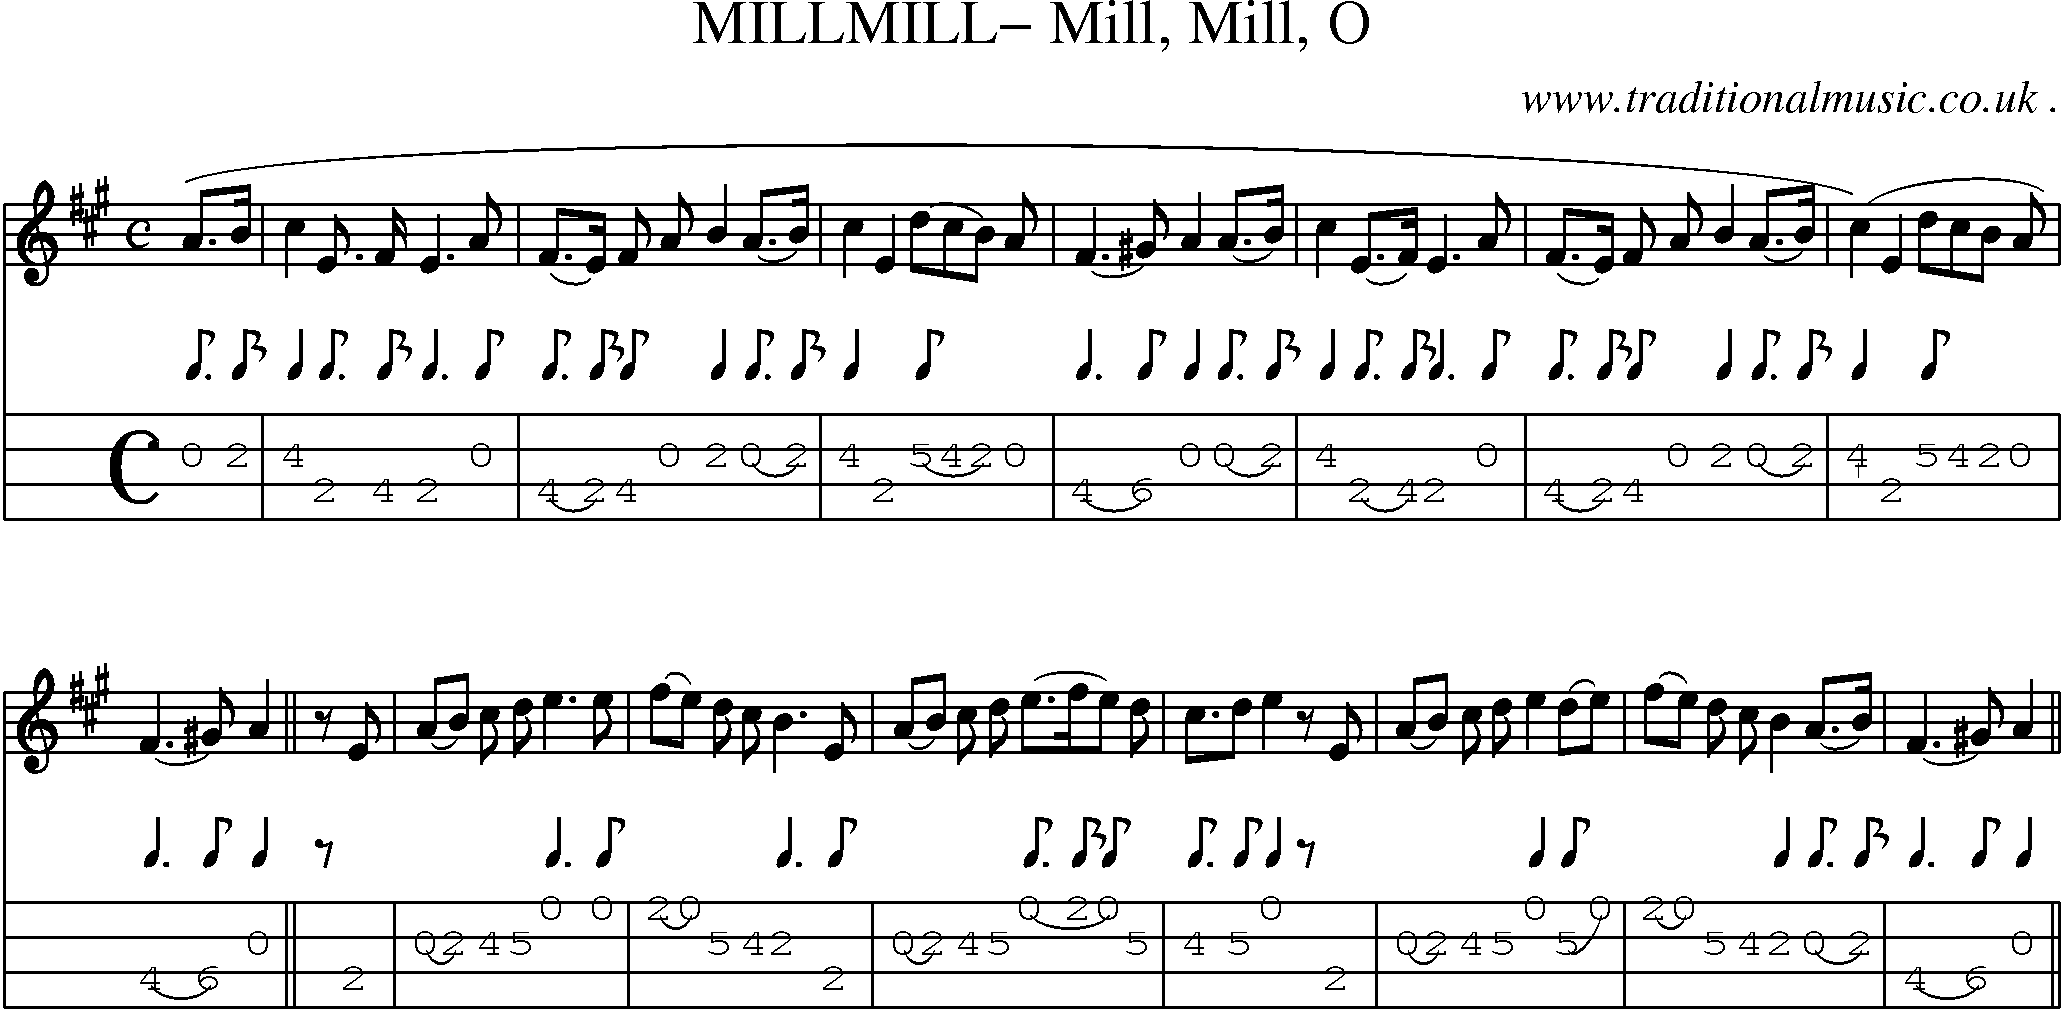 Sheet-Music and Mandolin Tabs for Millmill Mill Mill O